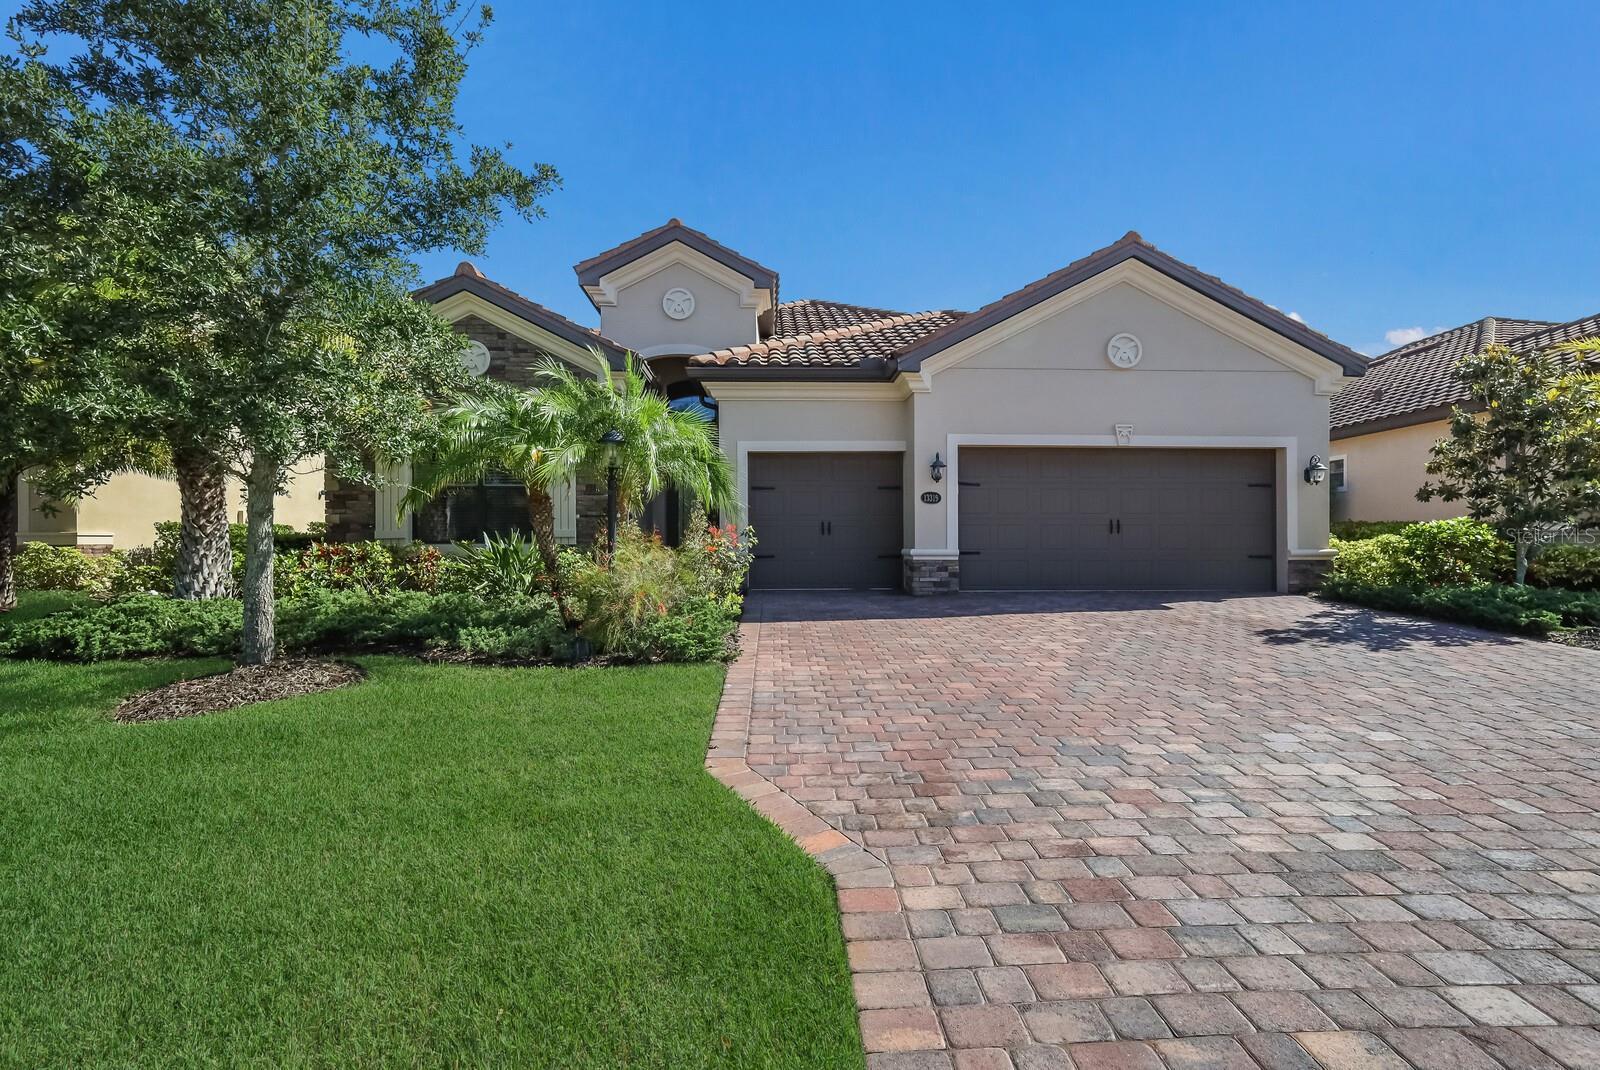 Photo one of 13319 Swiftwater Way Lakewood Ranch FL 34211 | MLS A4594317